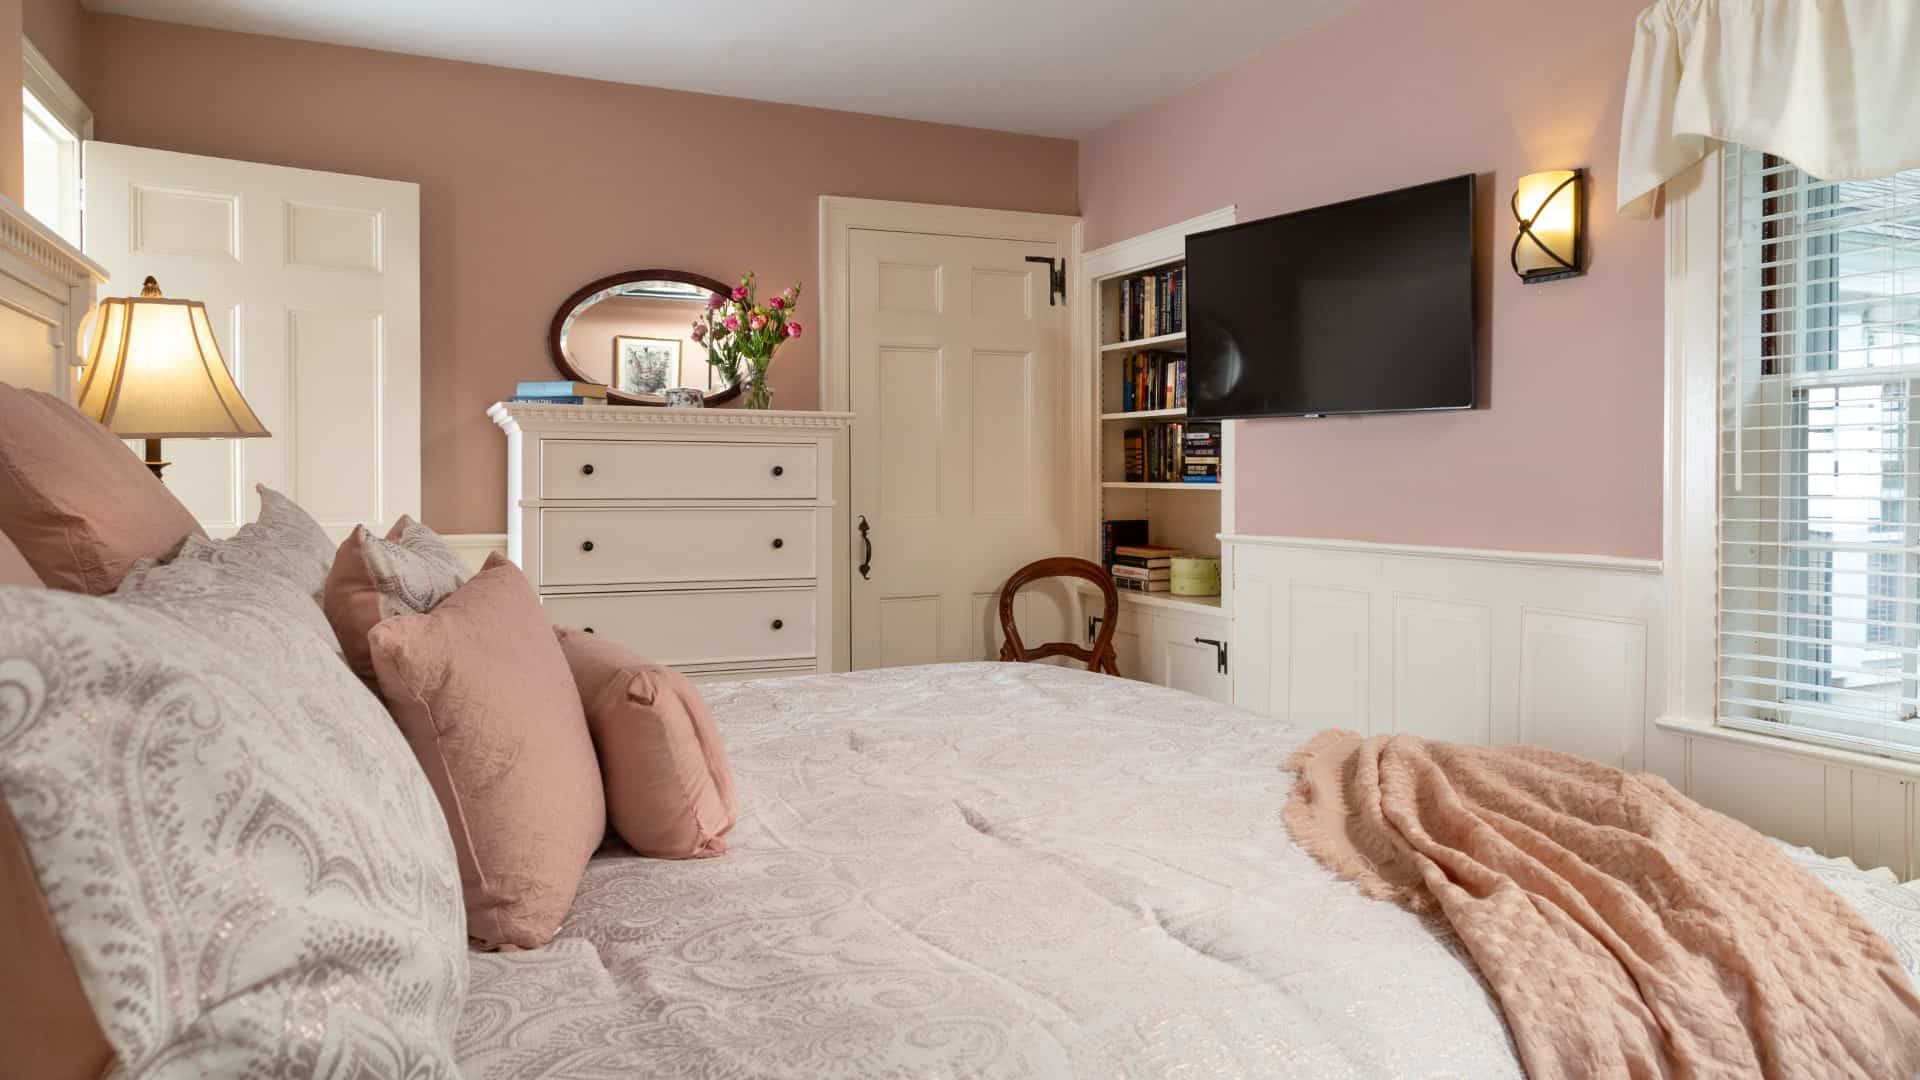 Bedroom with peach walls, white trim, light paisley bedding, white dresser, and wall-mounted flat-screen TV